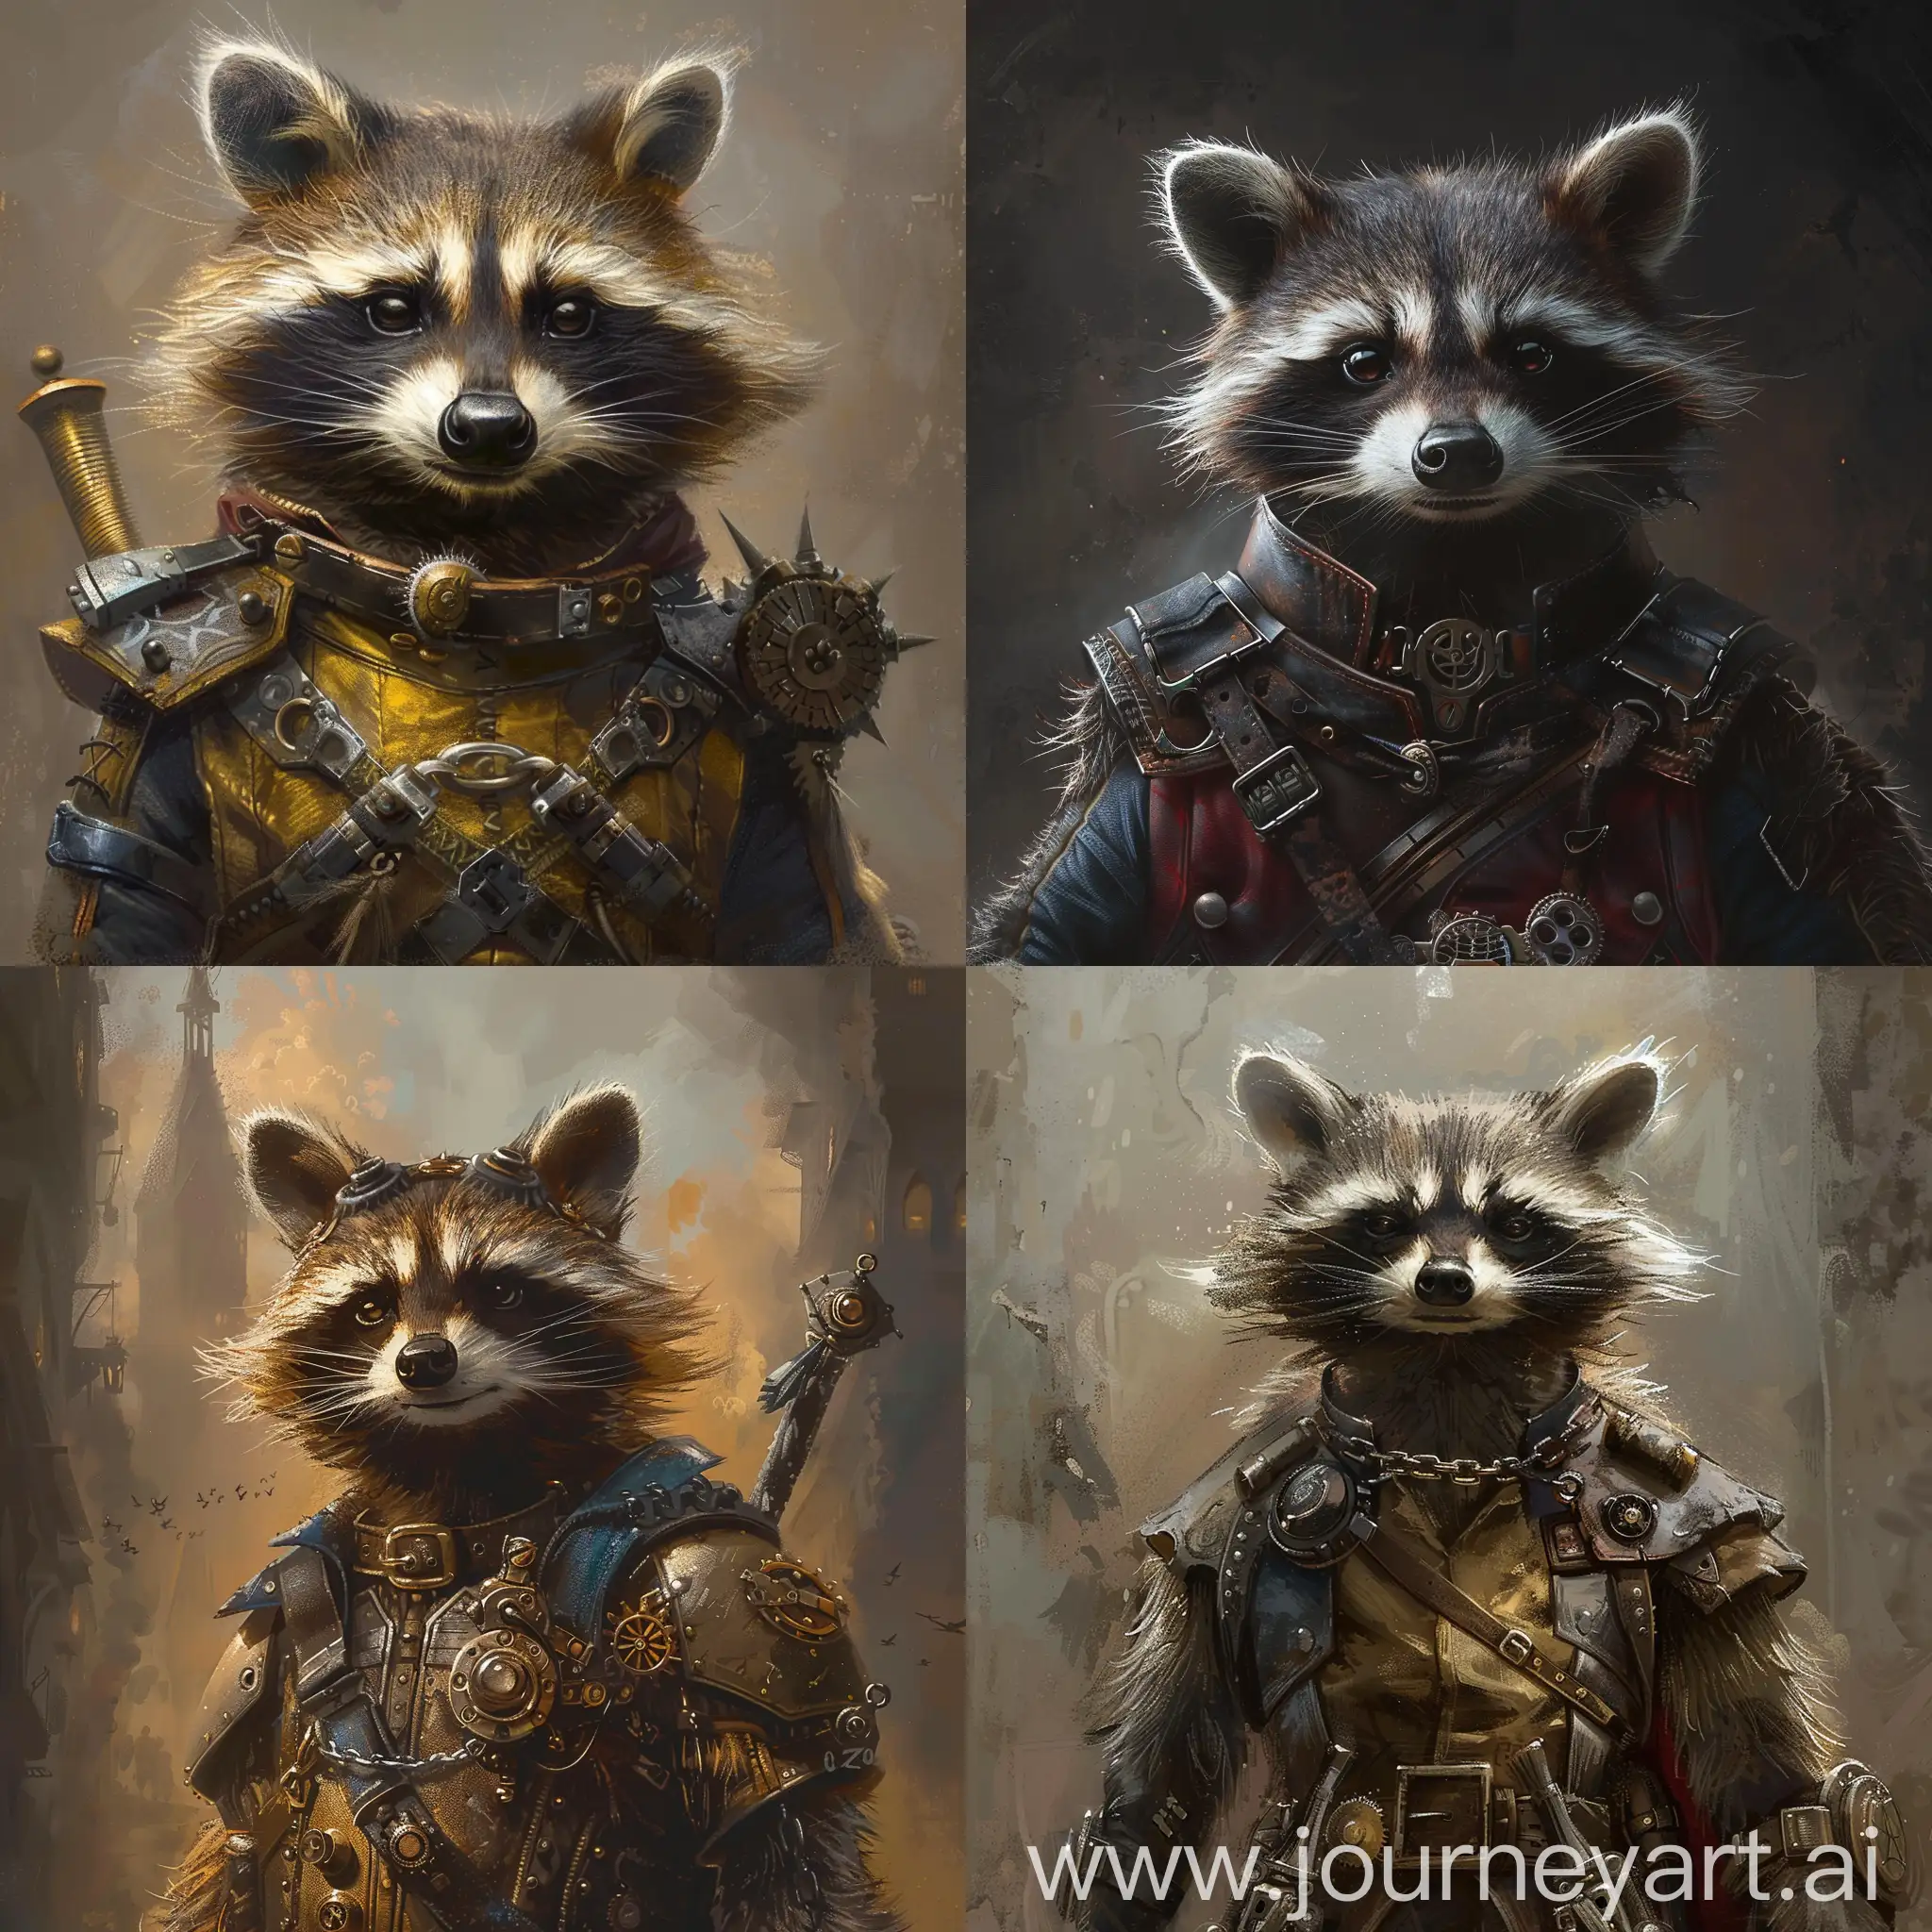 Rocket raccoon with a steampunk and medieval style